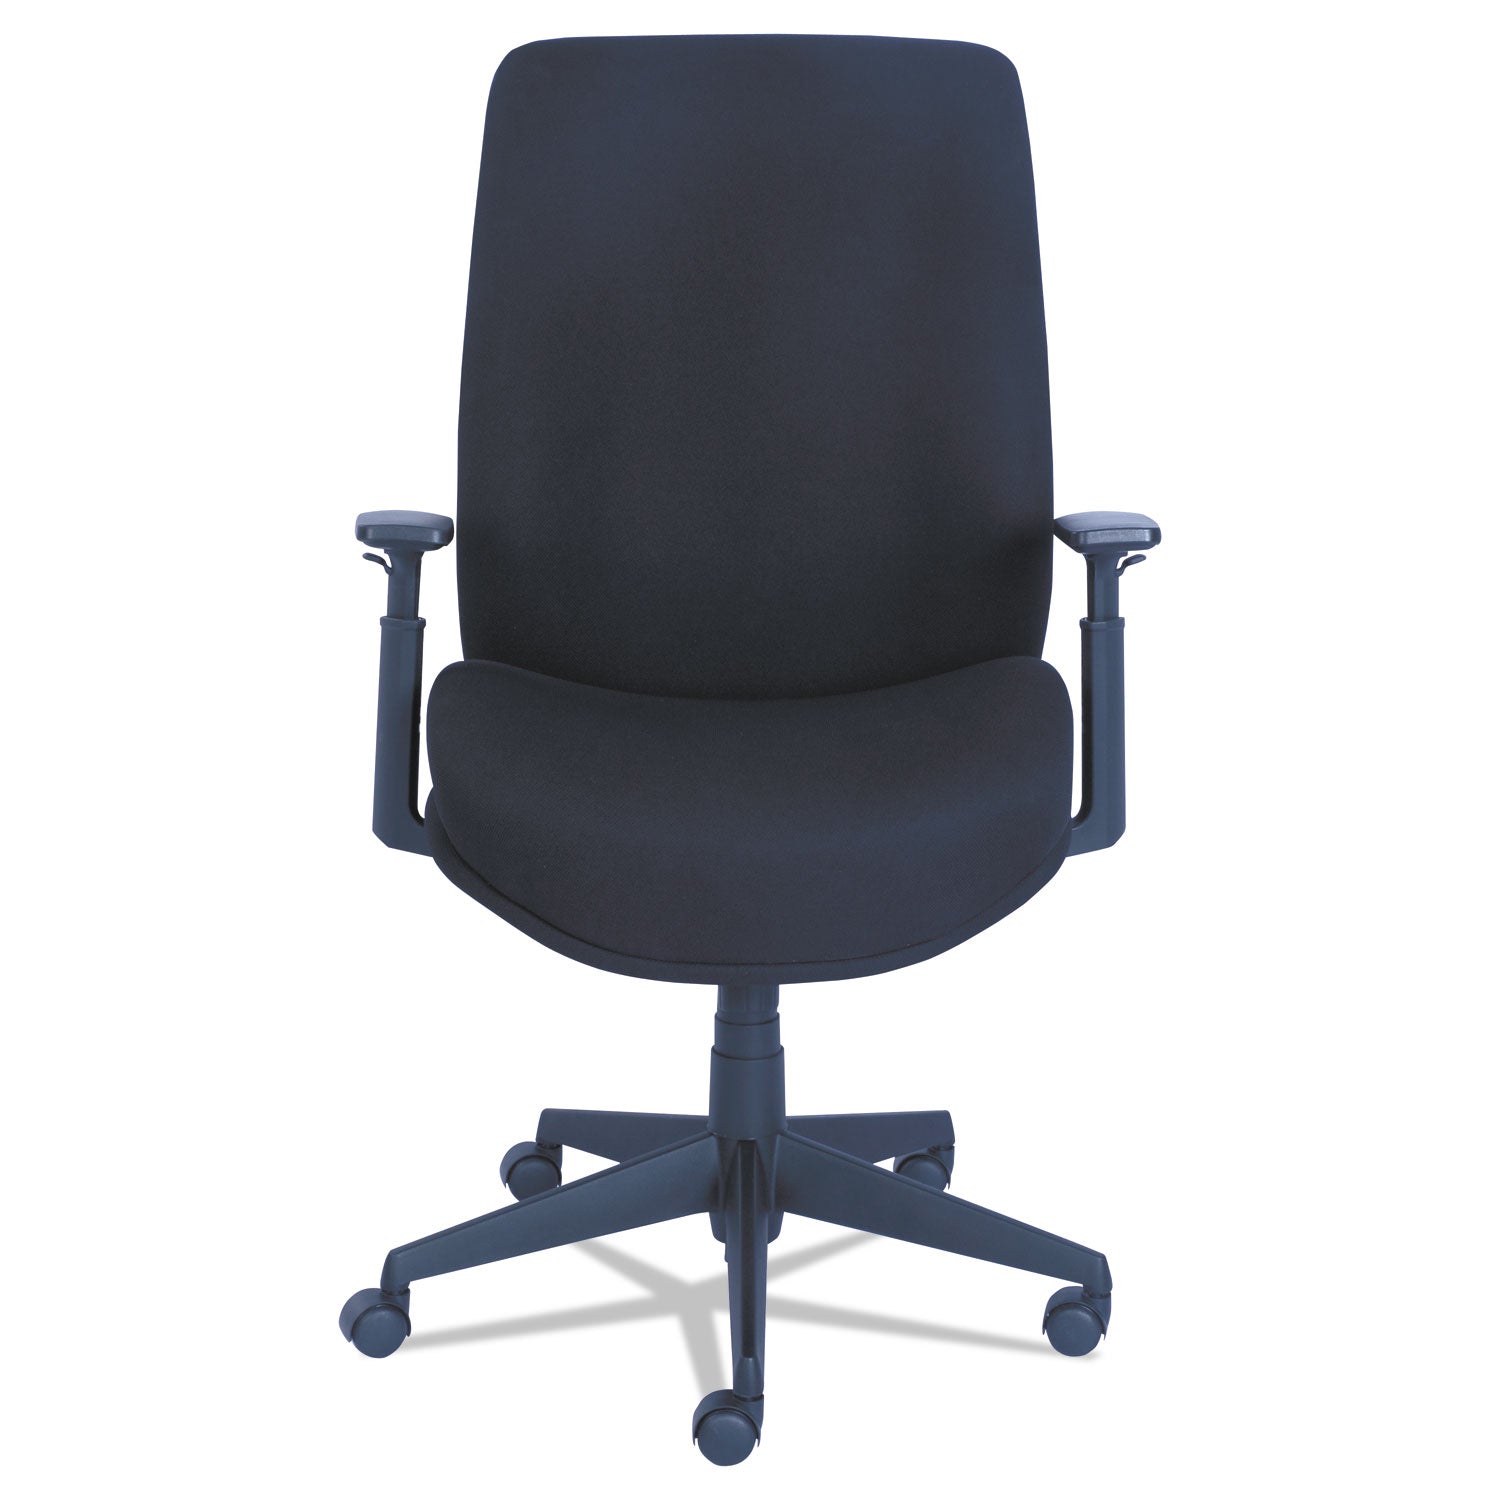 baldwyn-series-mid-back-task-chair-supports-up-to-275-lb-19-to-22-seat-height-black_lzb48825 - 2